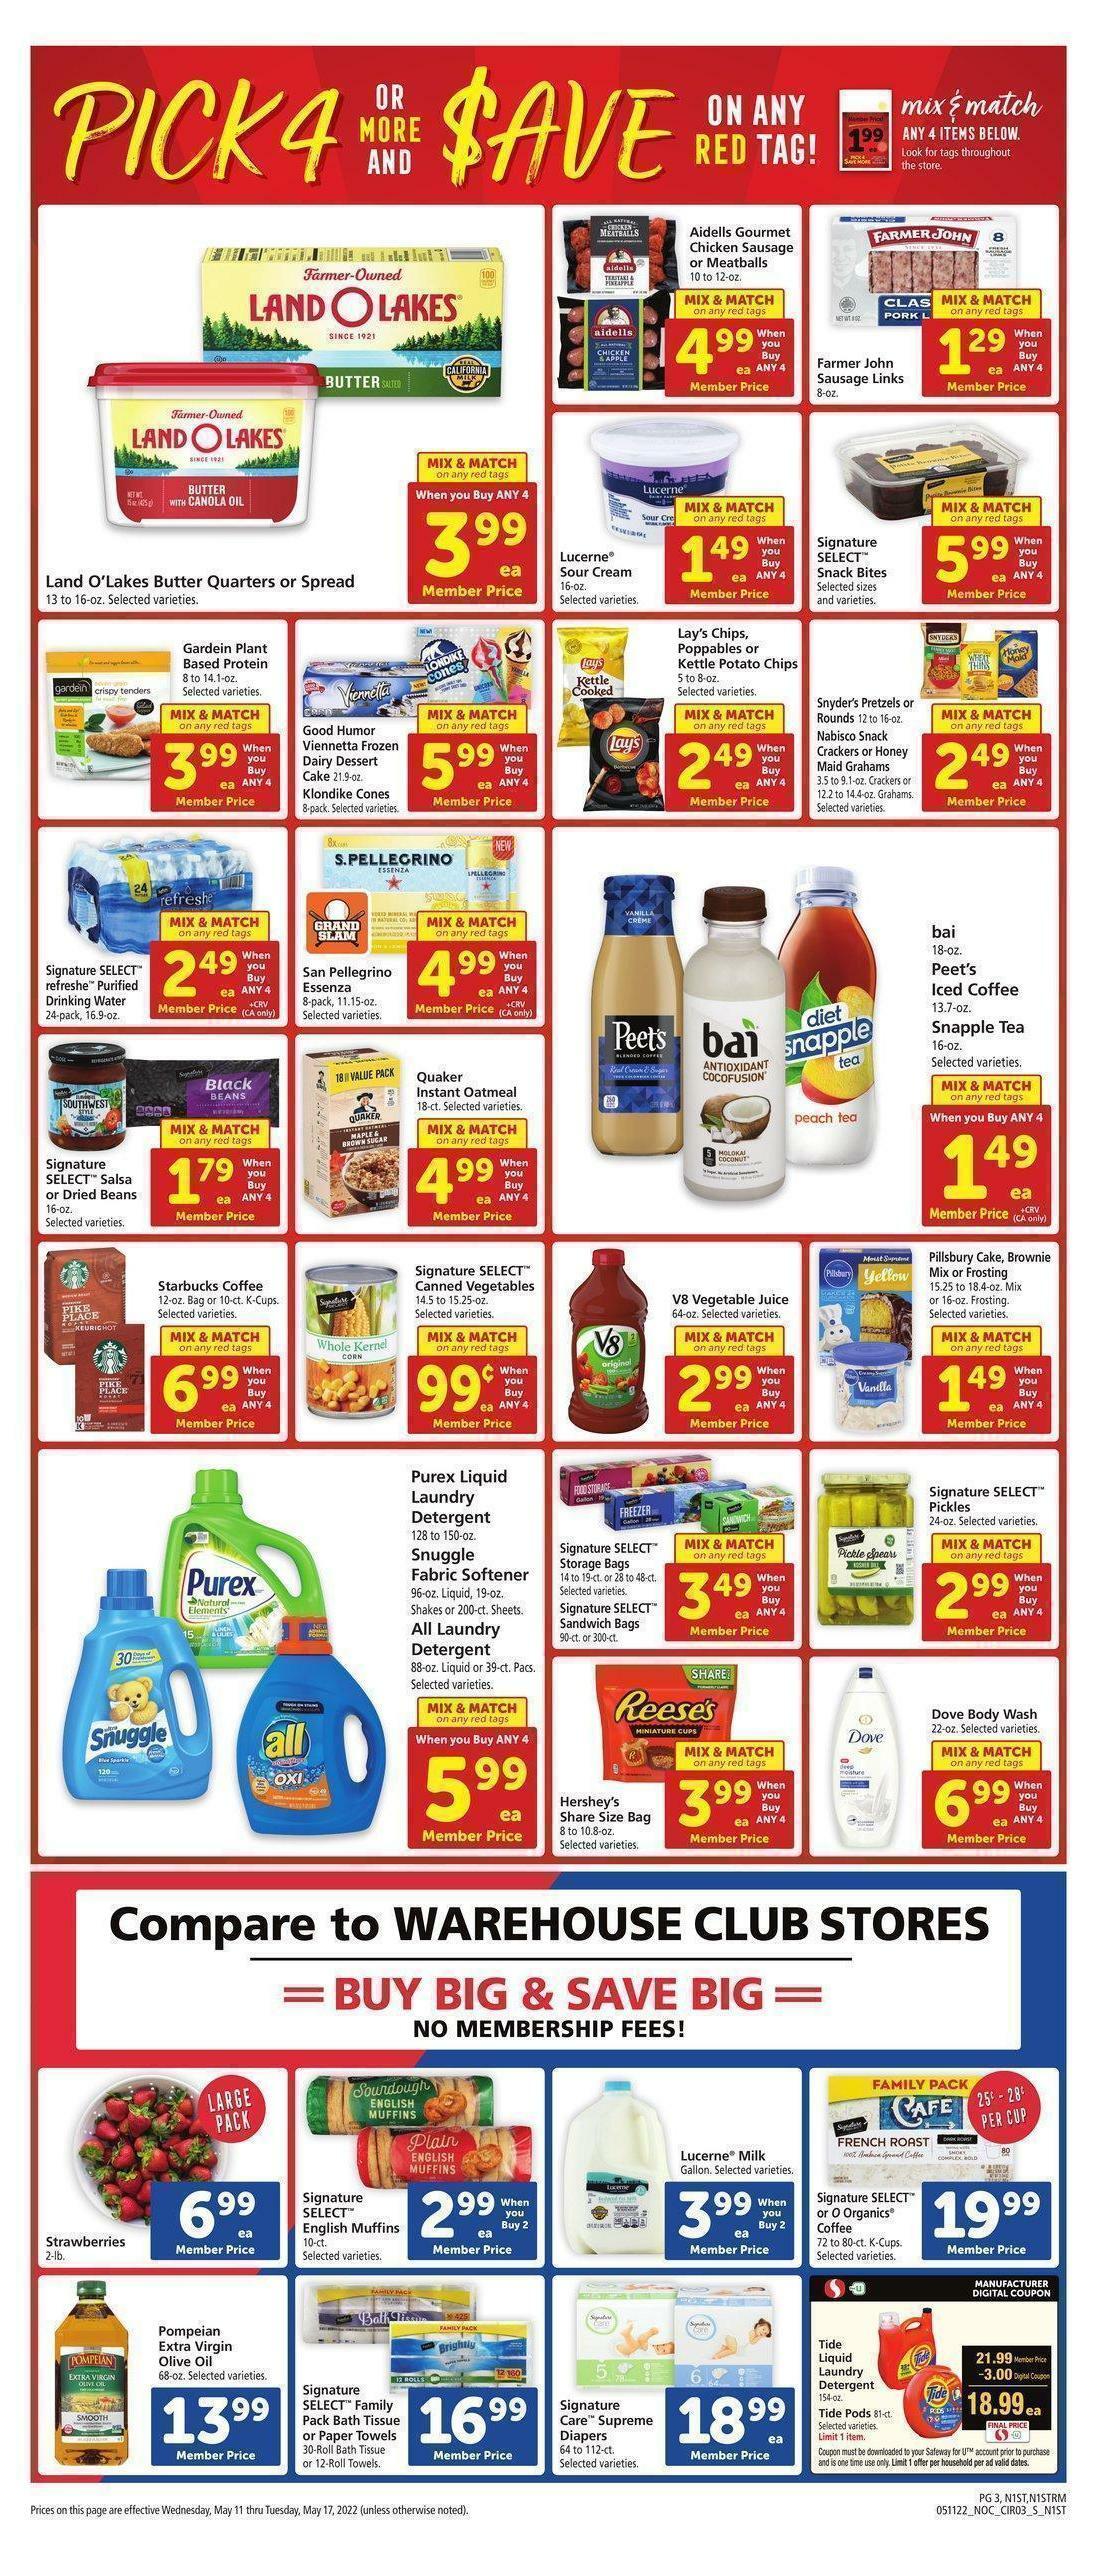 Safeway Weekly Ad from May 11